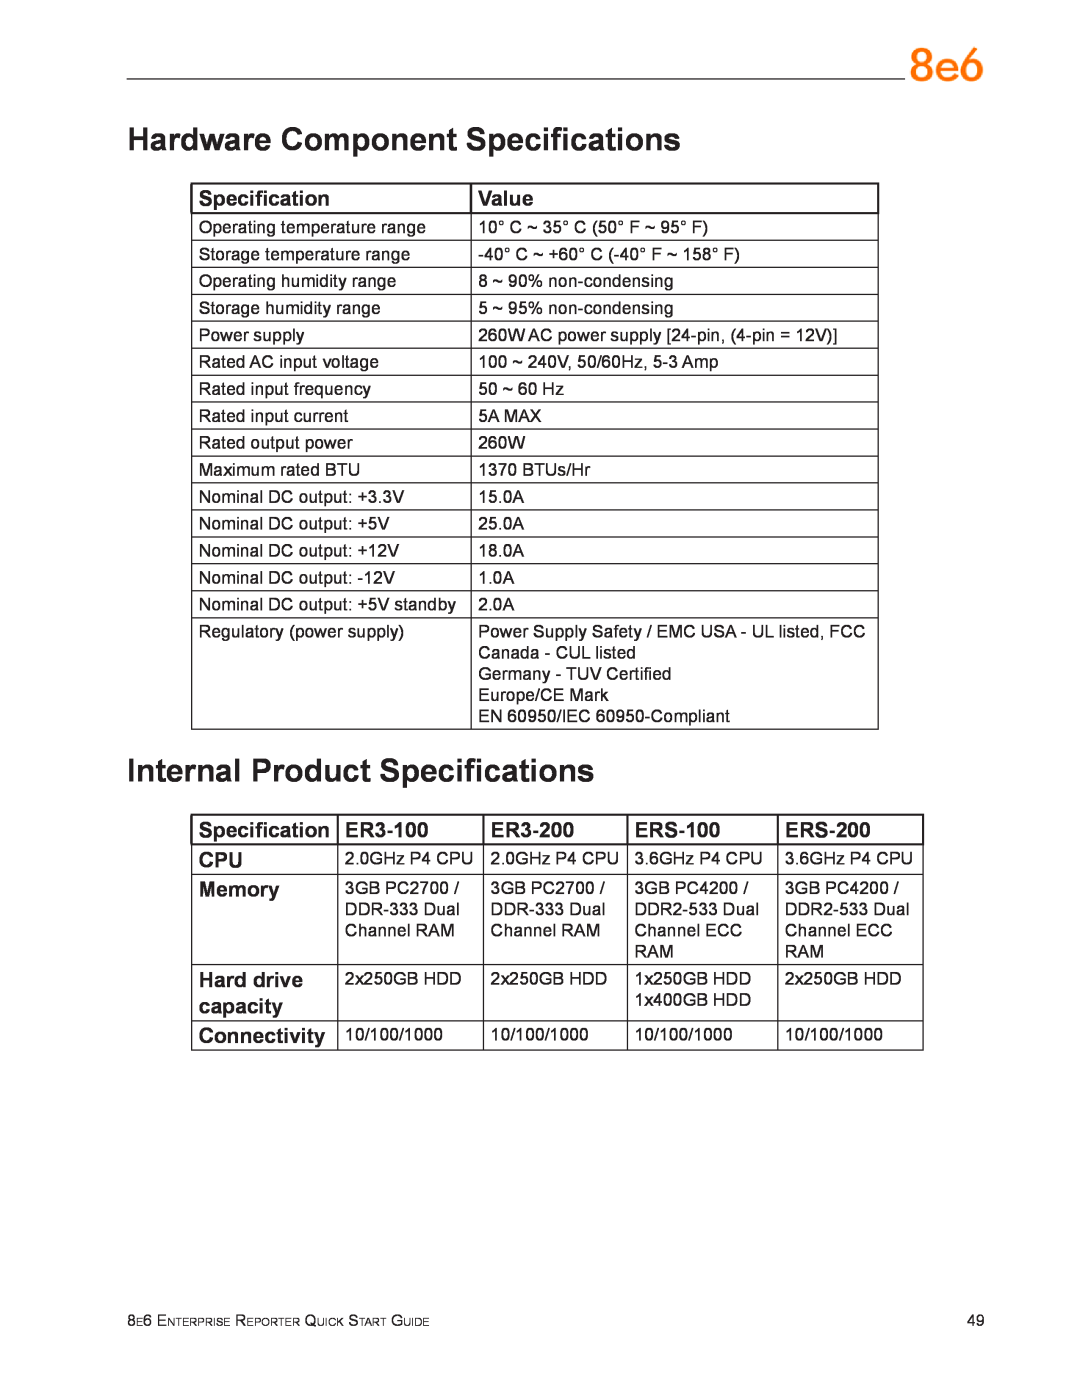 8e6 Technologies ERS-100 (5K02-51) Hardware Component Specifications, Internal Product Specifications, ER3-100, ER3-200 